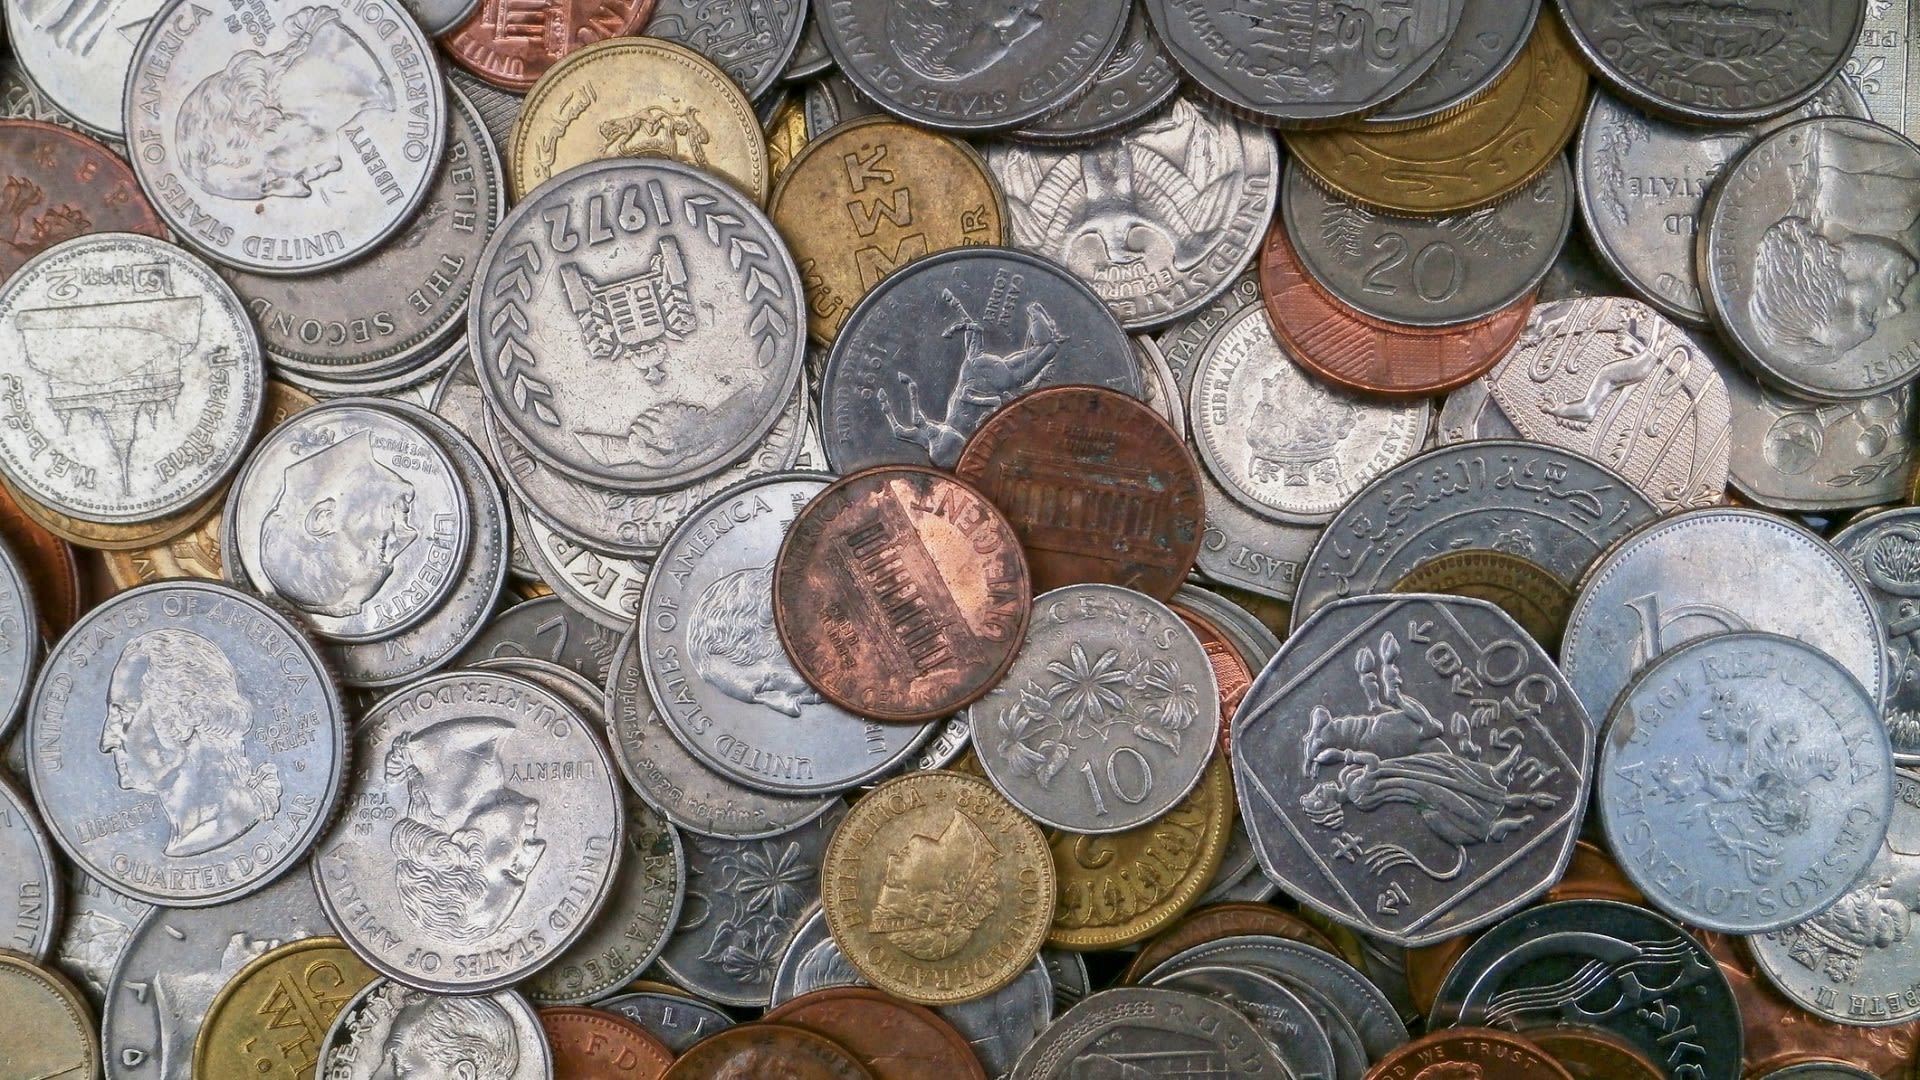 These 11 Rare Coins Sold for Over $1 Million